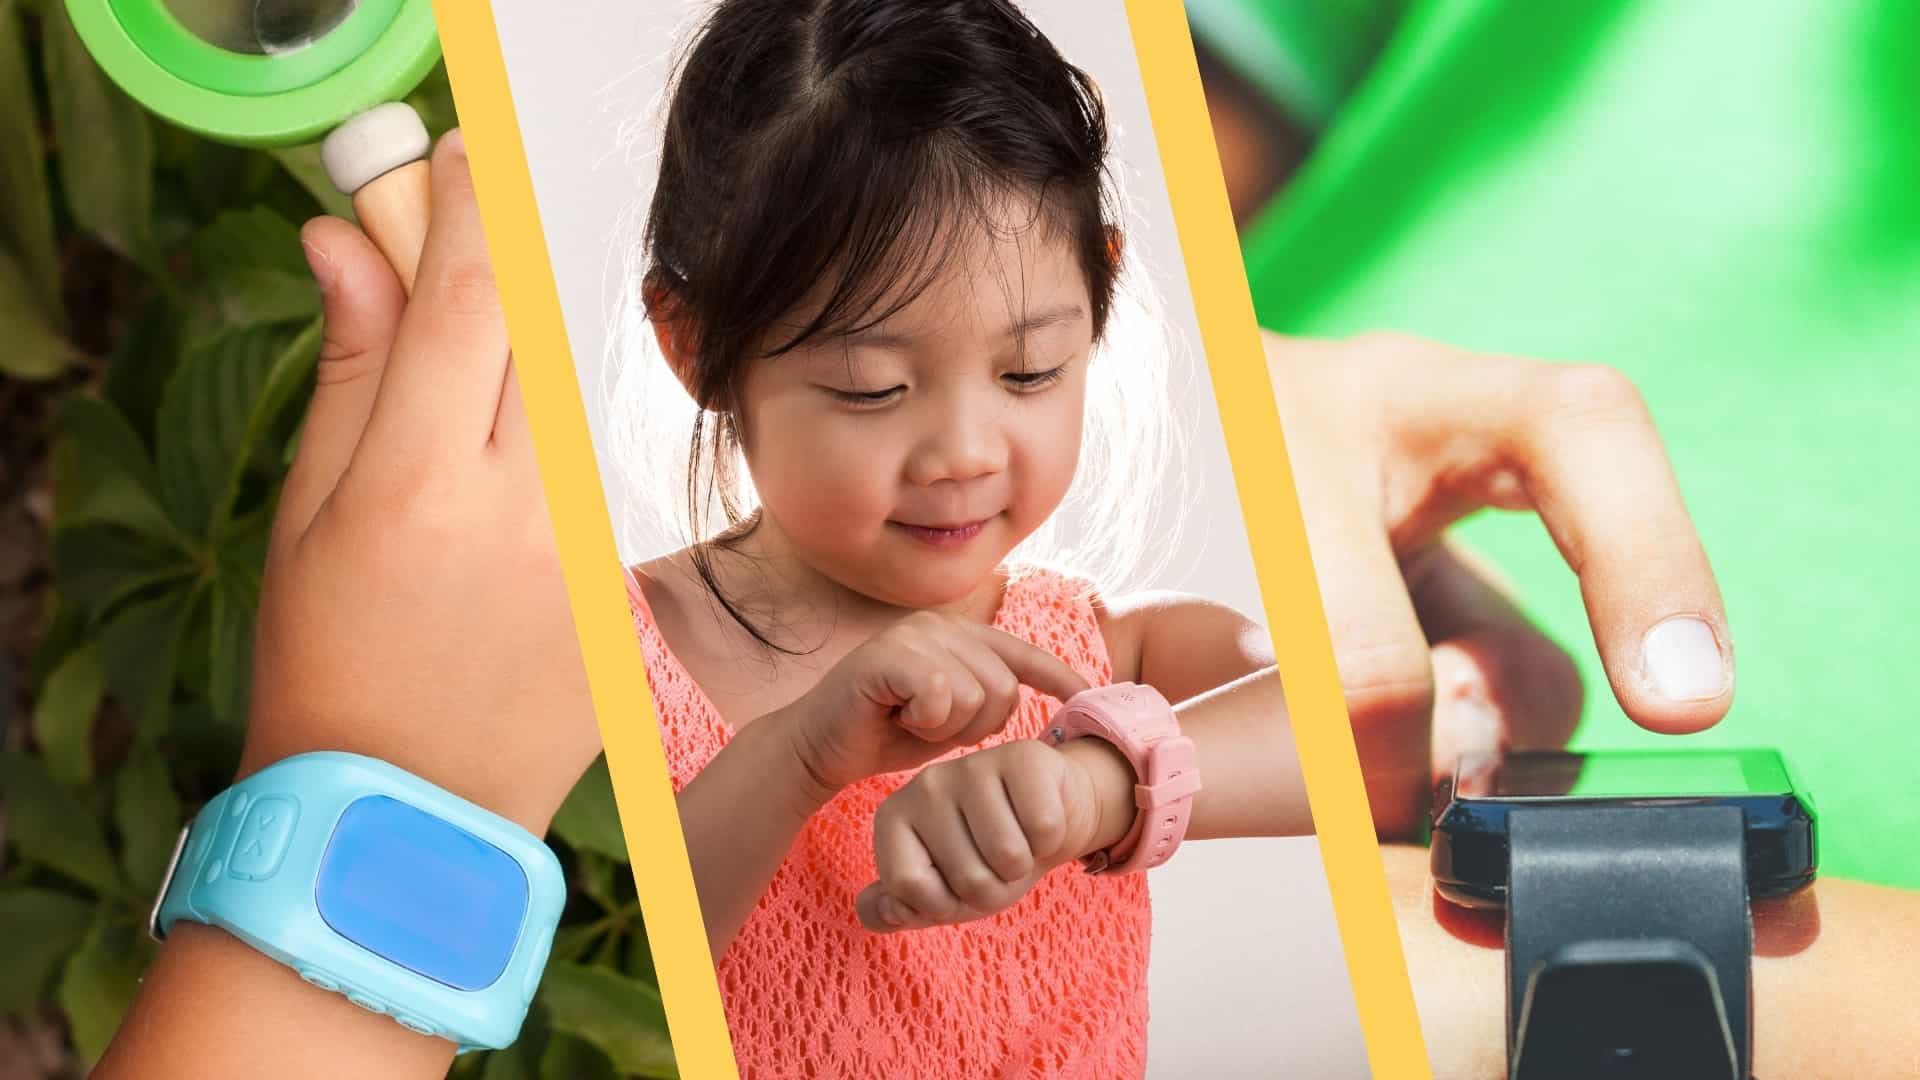 9 best smartwatches for kids tested: these are the results